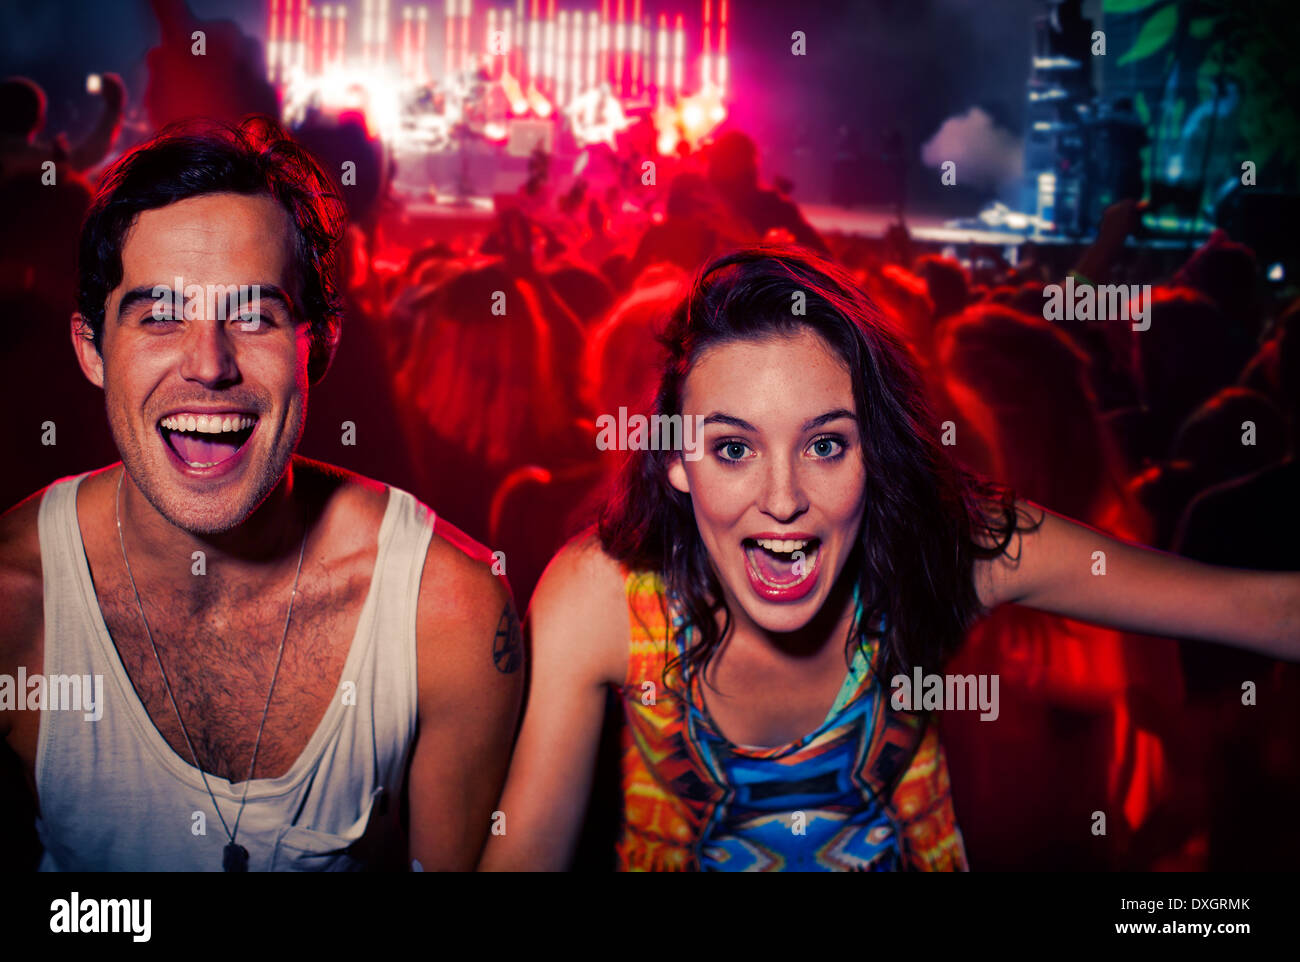 Enthusiastic couple cheering at music festival Stock Photo